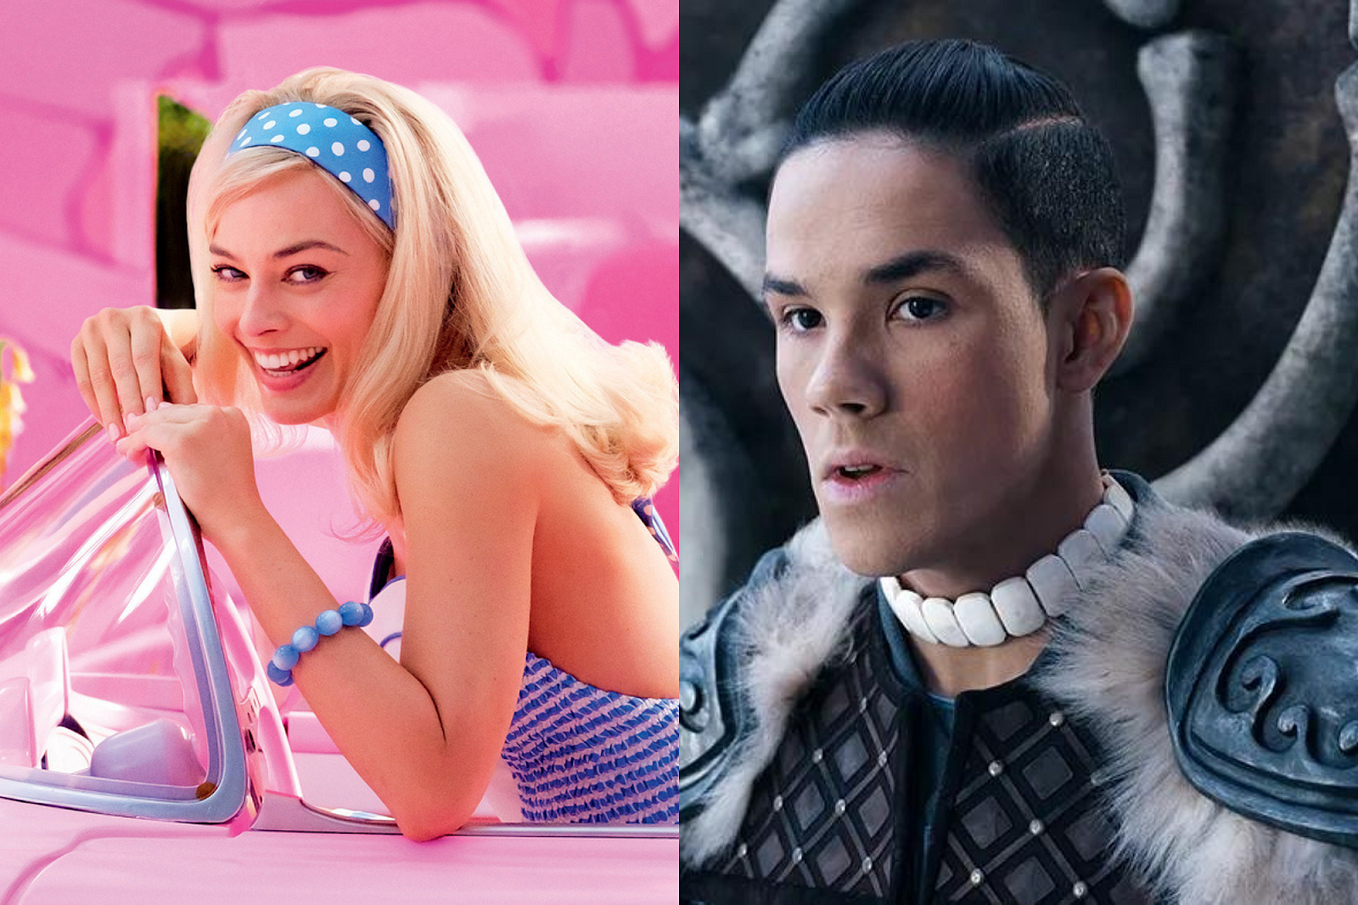 on the left is a picture of Barbie from the promotional images for the film “Barbie”. On the right is an image of the latest version of the Live action “Avatar the Last Airbender’s” Sokka